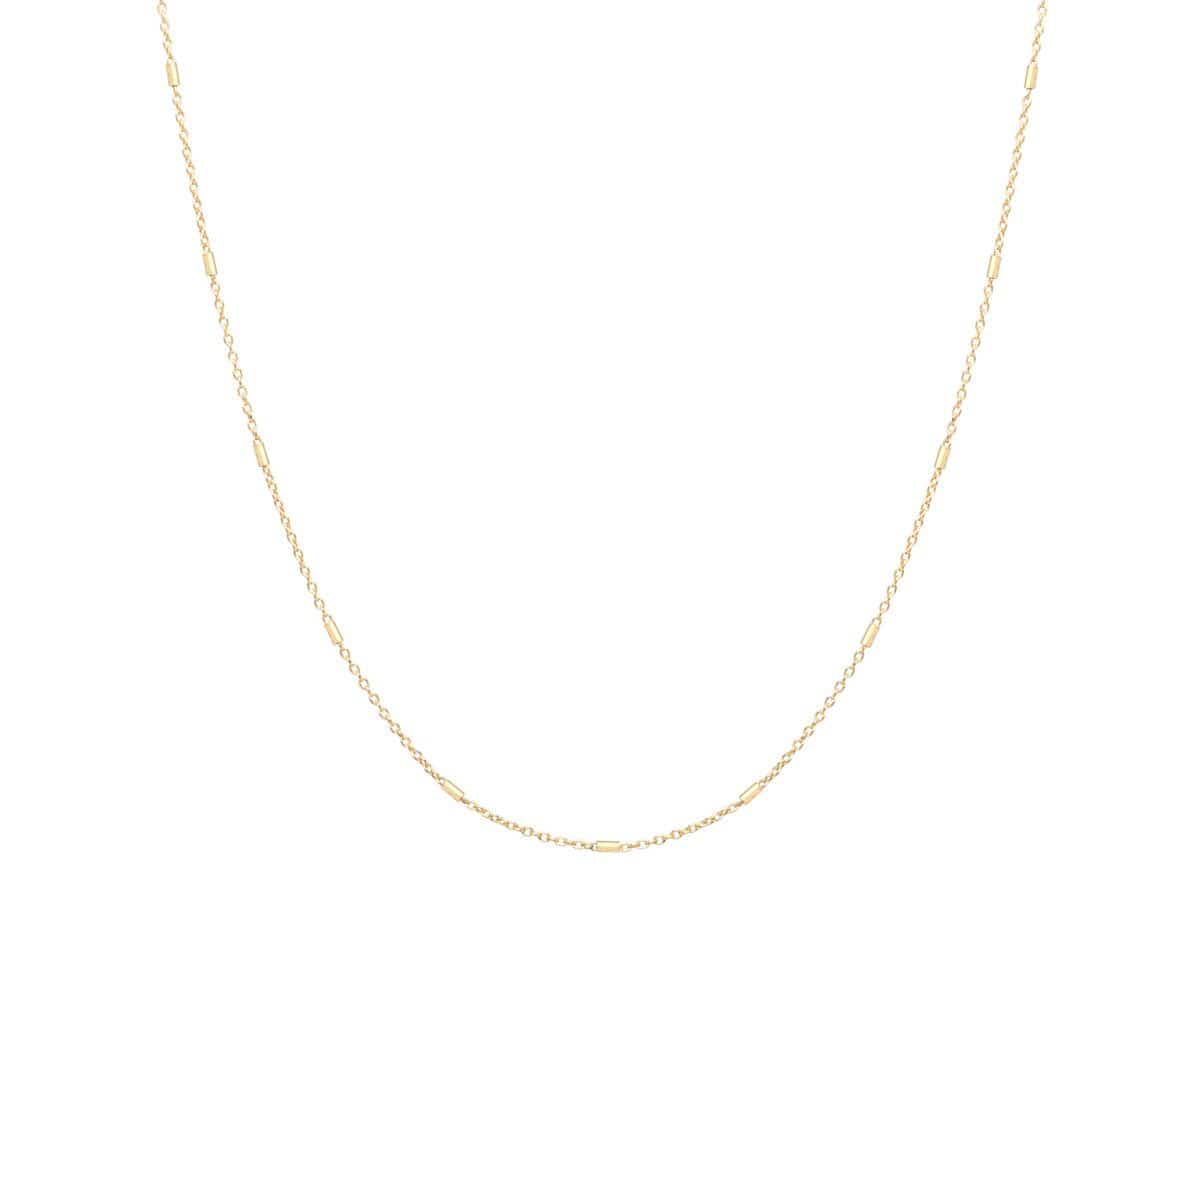 CHN-14K 18" 14K GOLD TINY BAR CABLE CHAIN NECKLACE